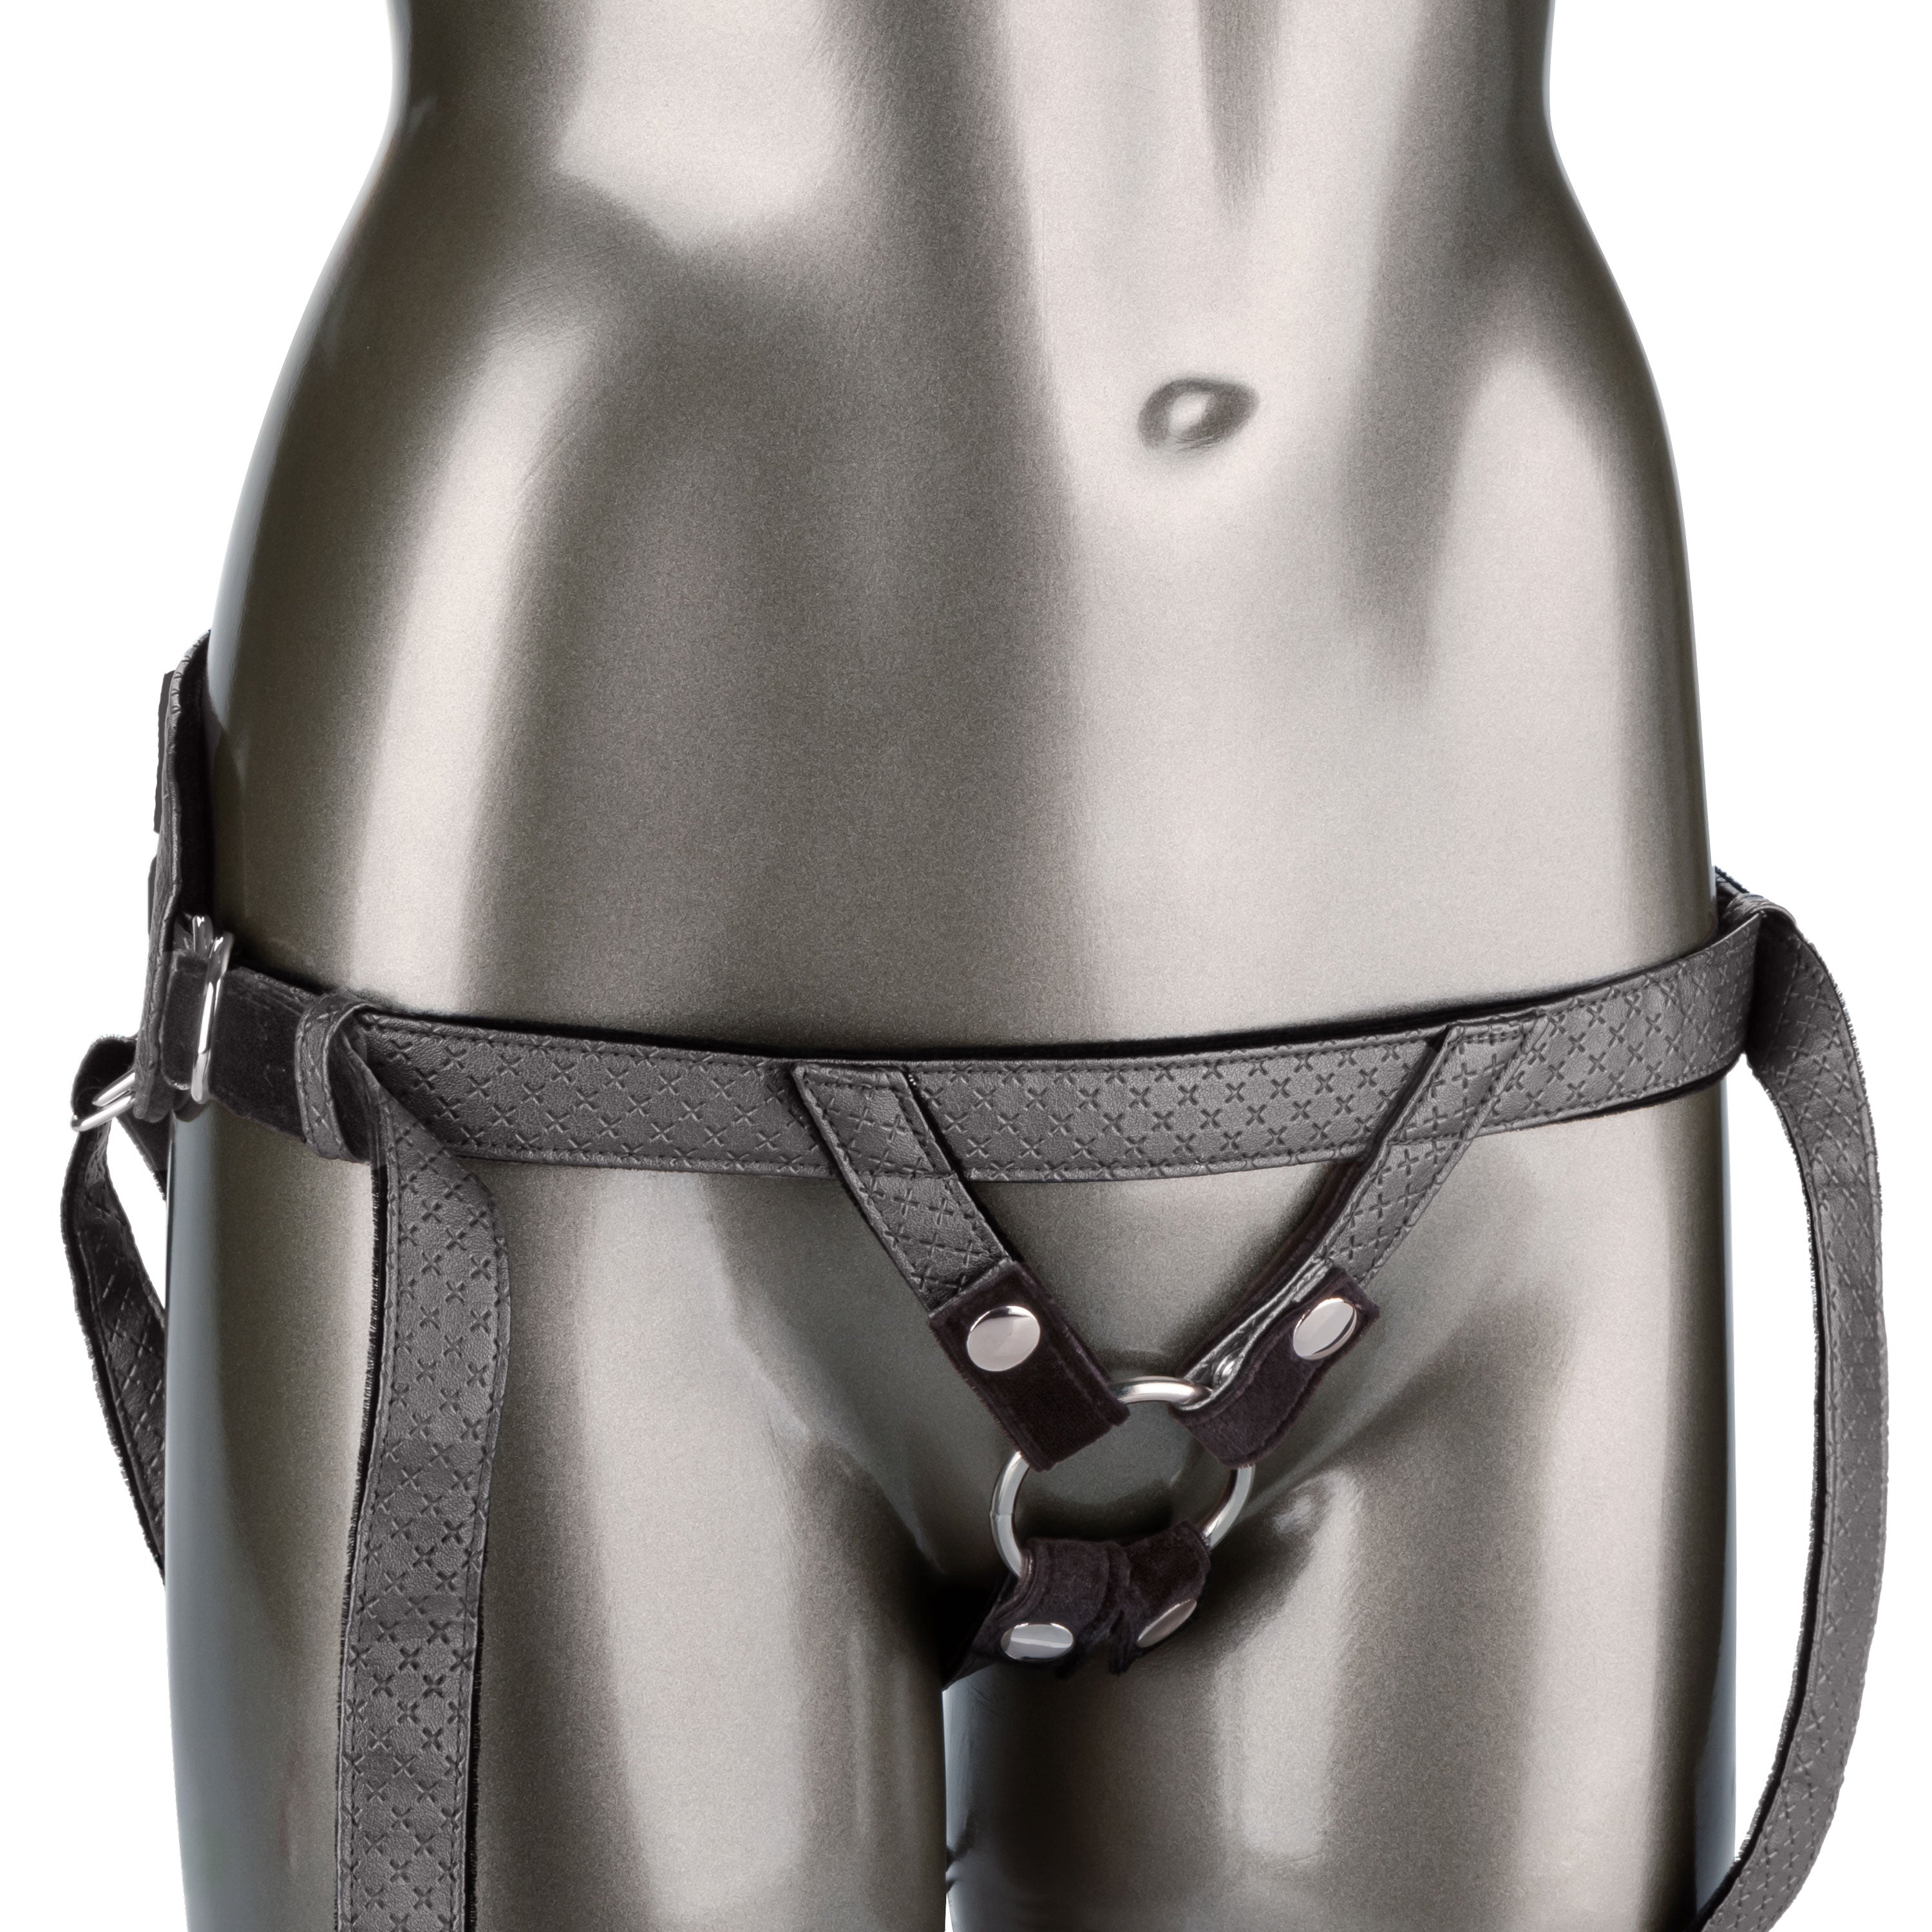 Experience Opulence and Comfort with the Regal Princess Premium Harness for Unparalleled Probe Play